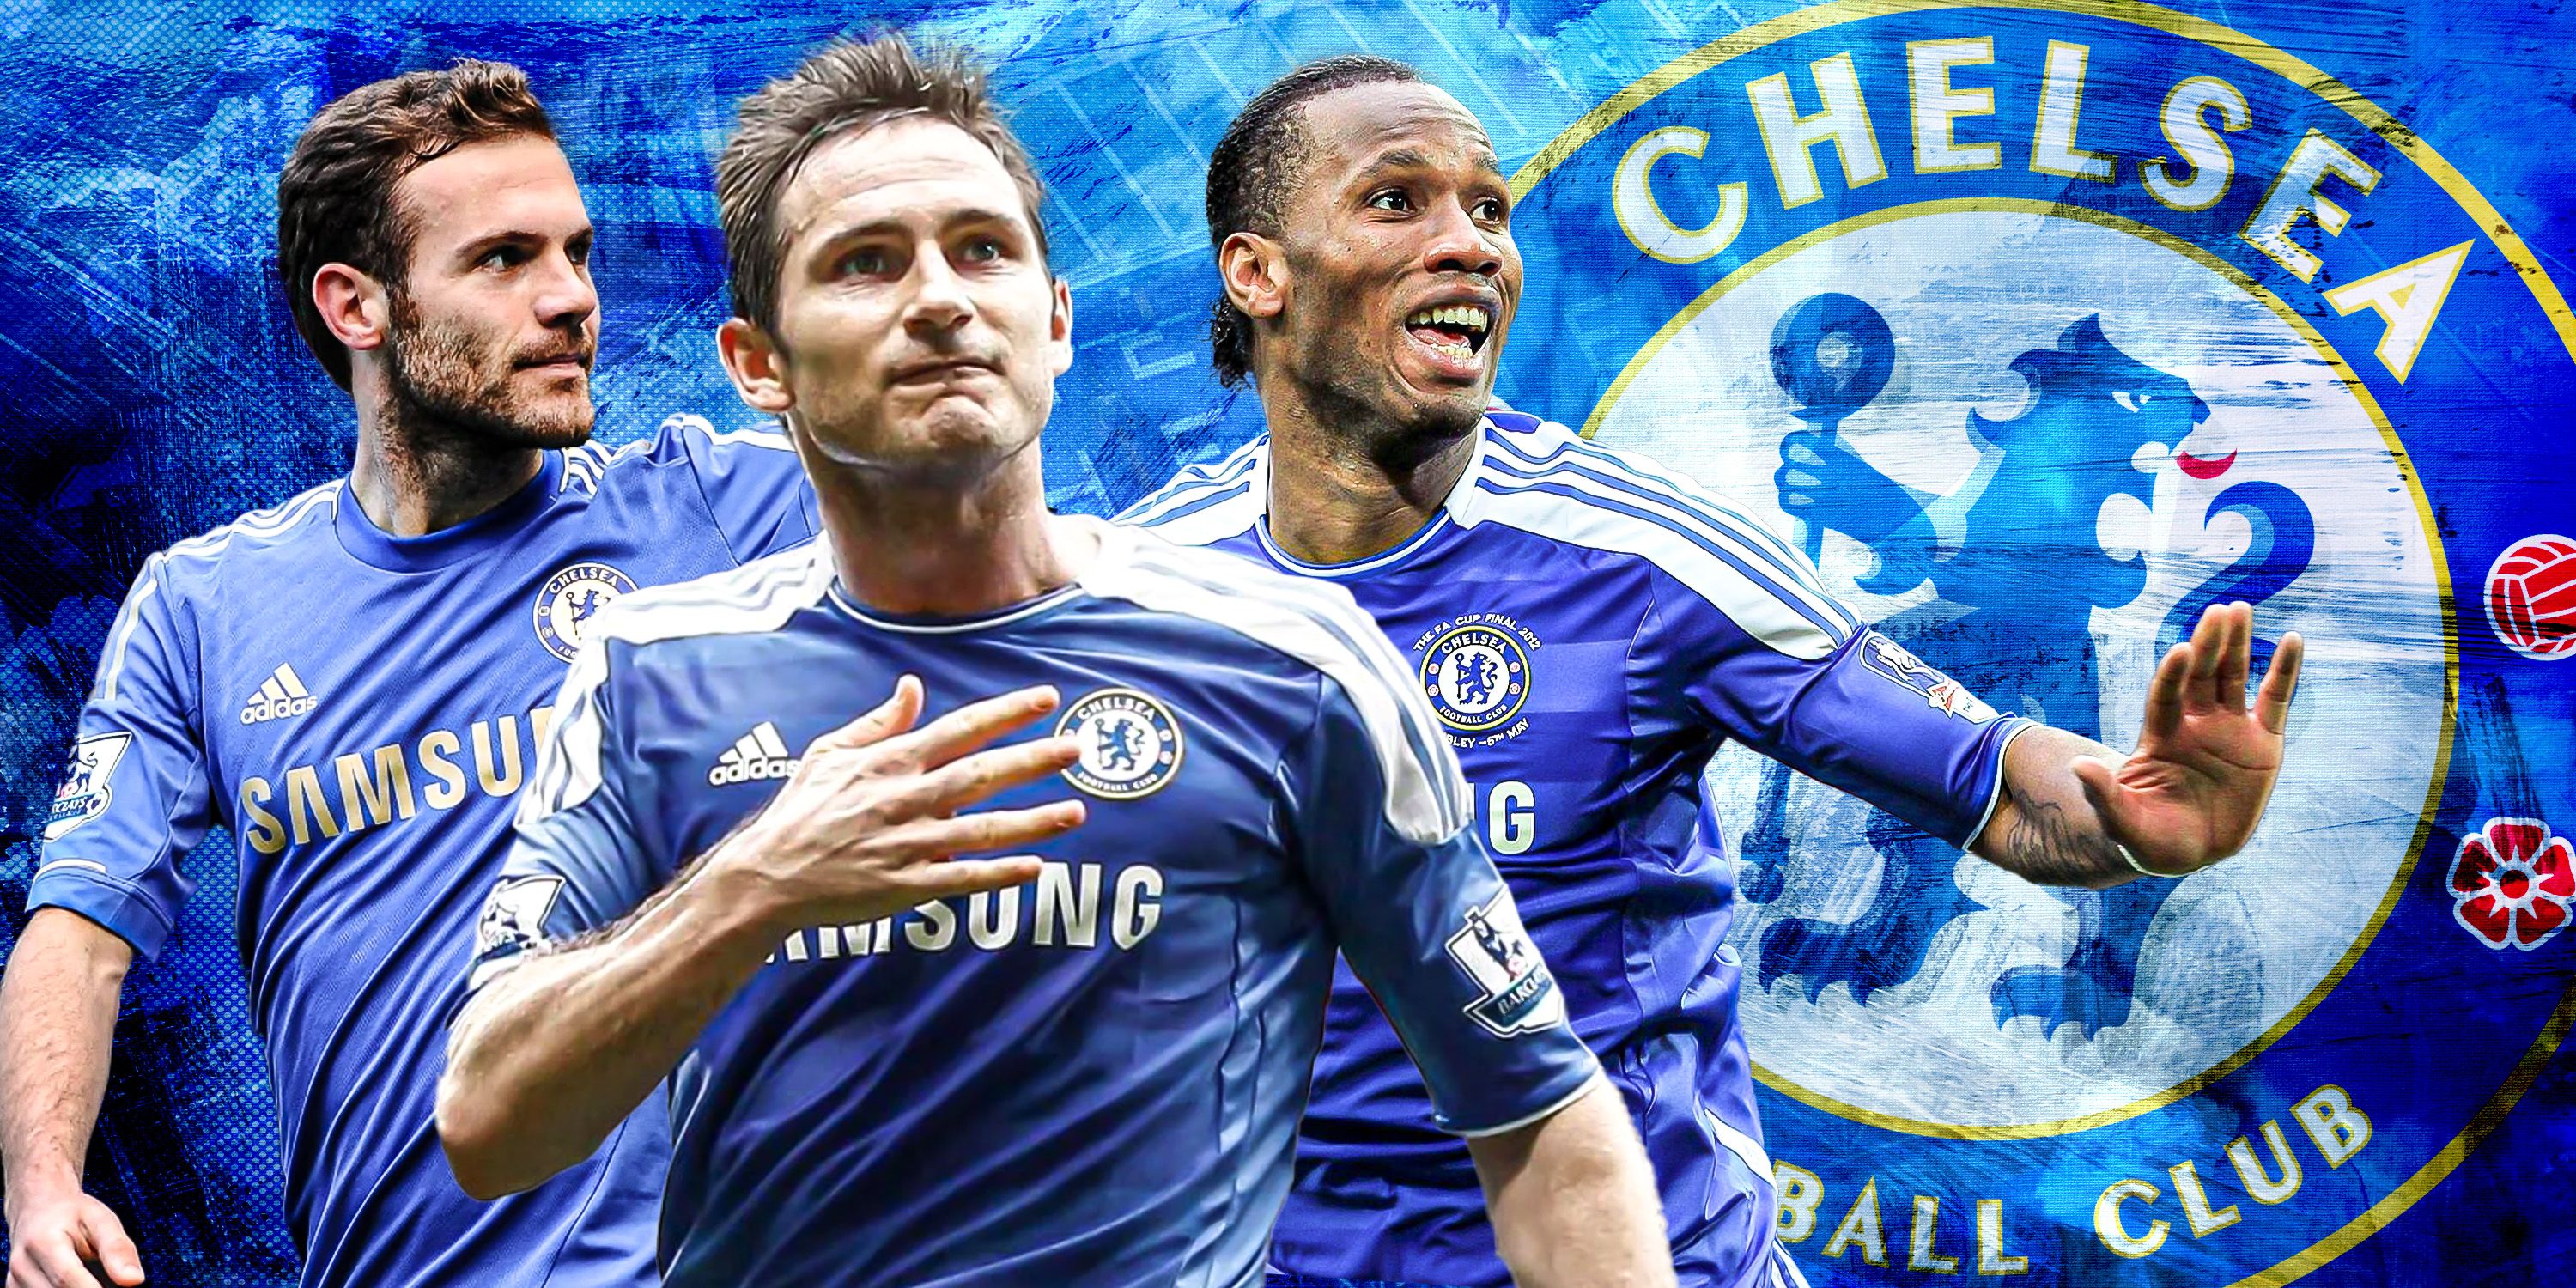 Juan Mata, Frank Lampard and Didier Drogba with the Chelsea crest.